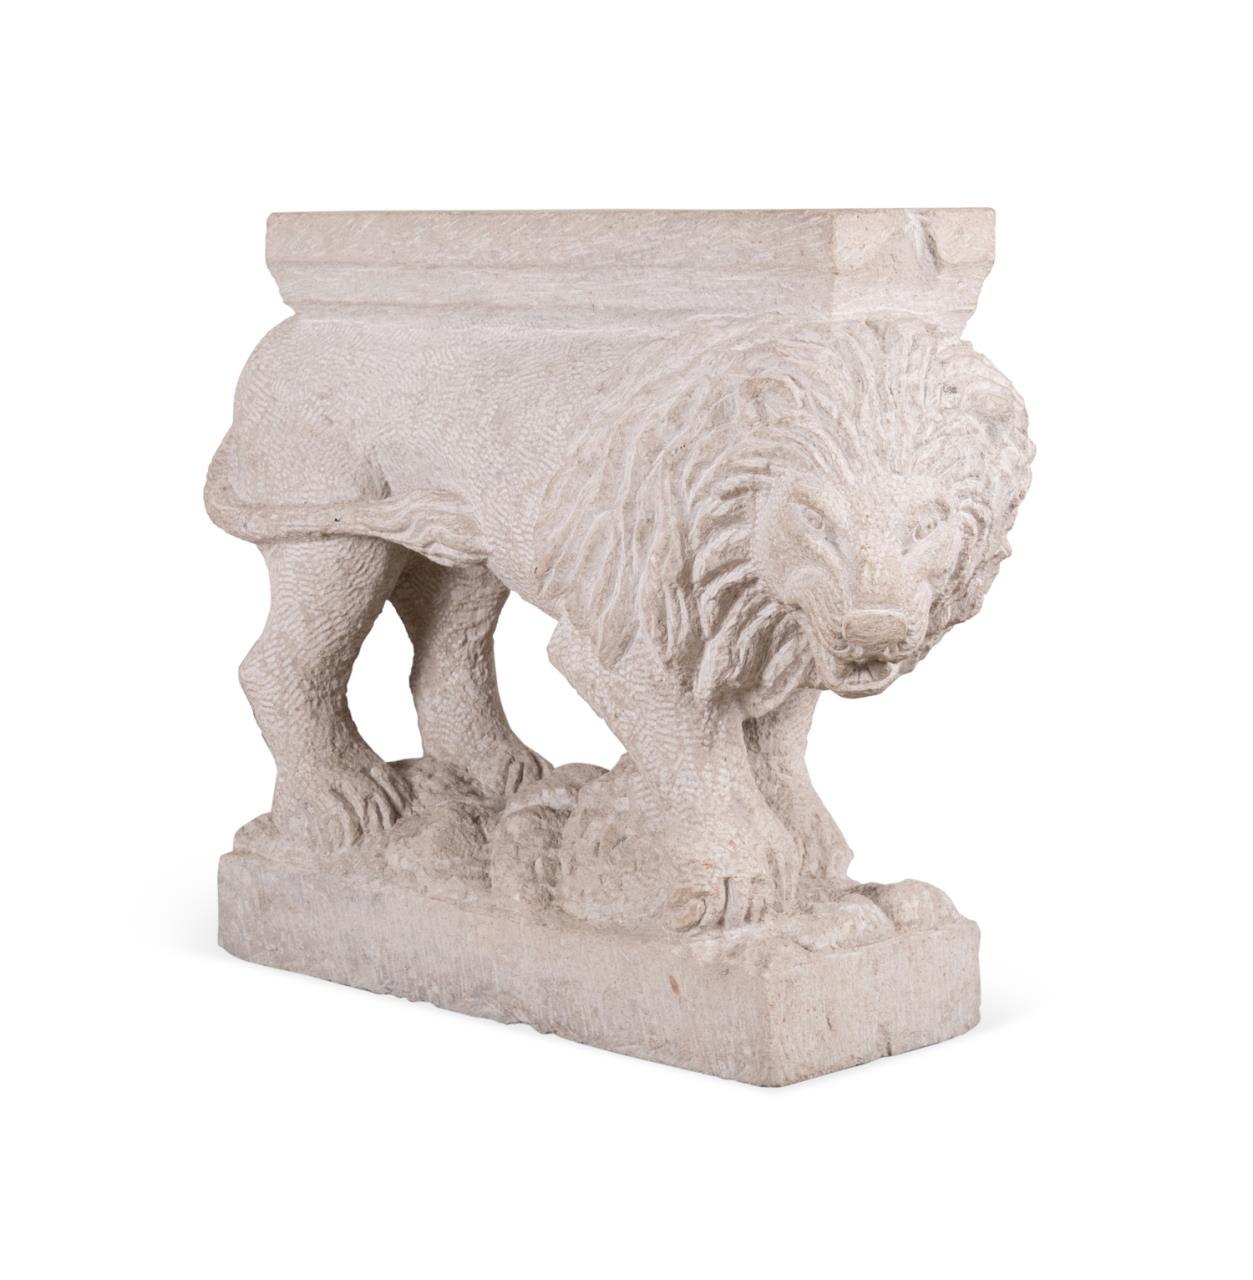 MEDIEVAL STYLE CARVED STONE LION